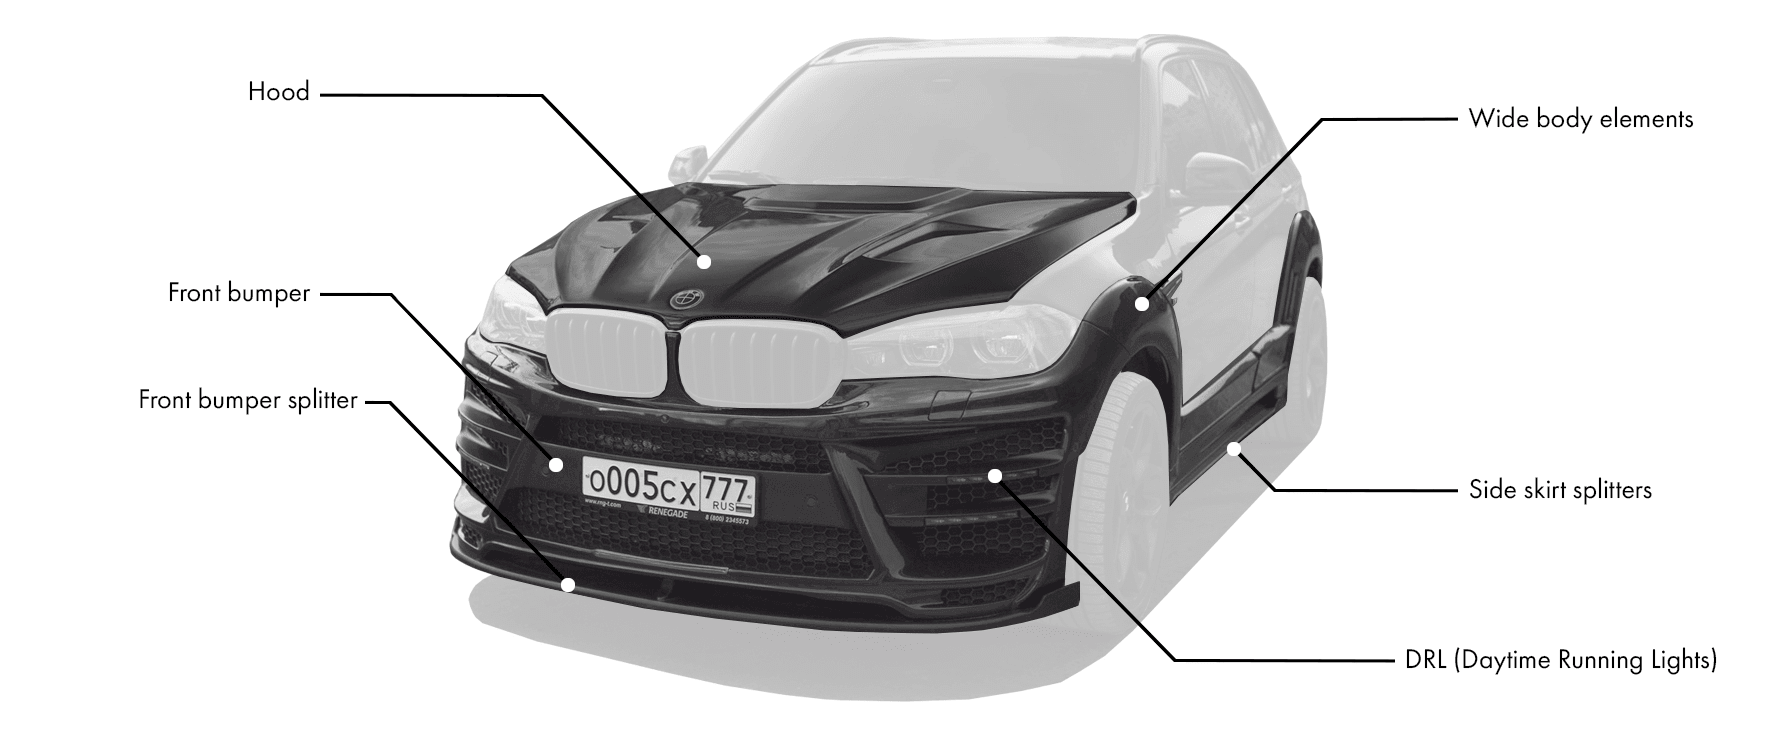 Check our price and buy Renegade Design body kit for BMW X5 F15